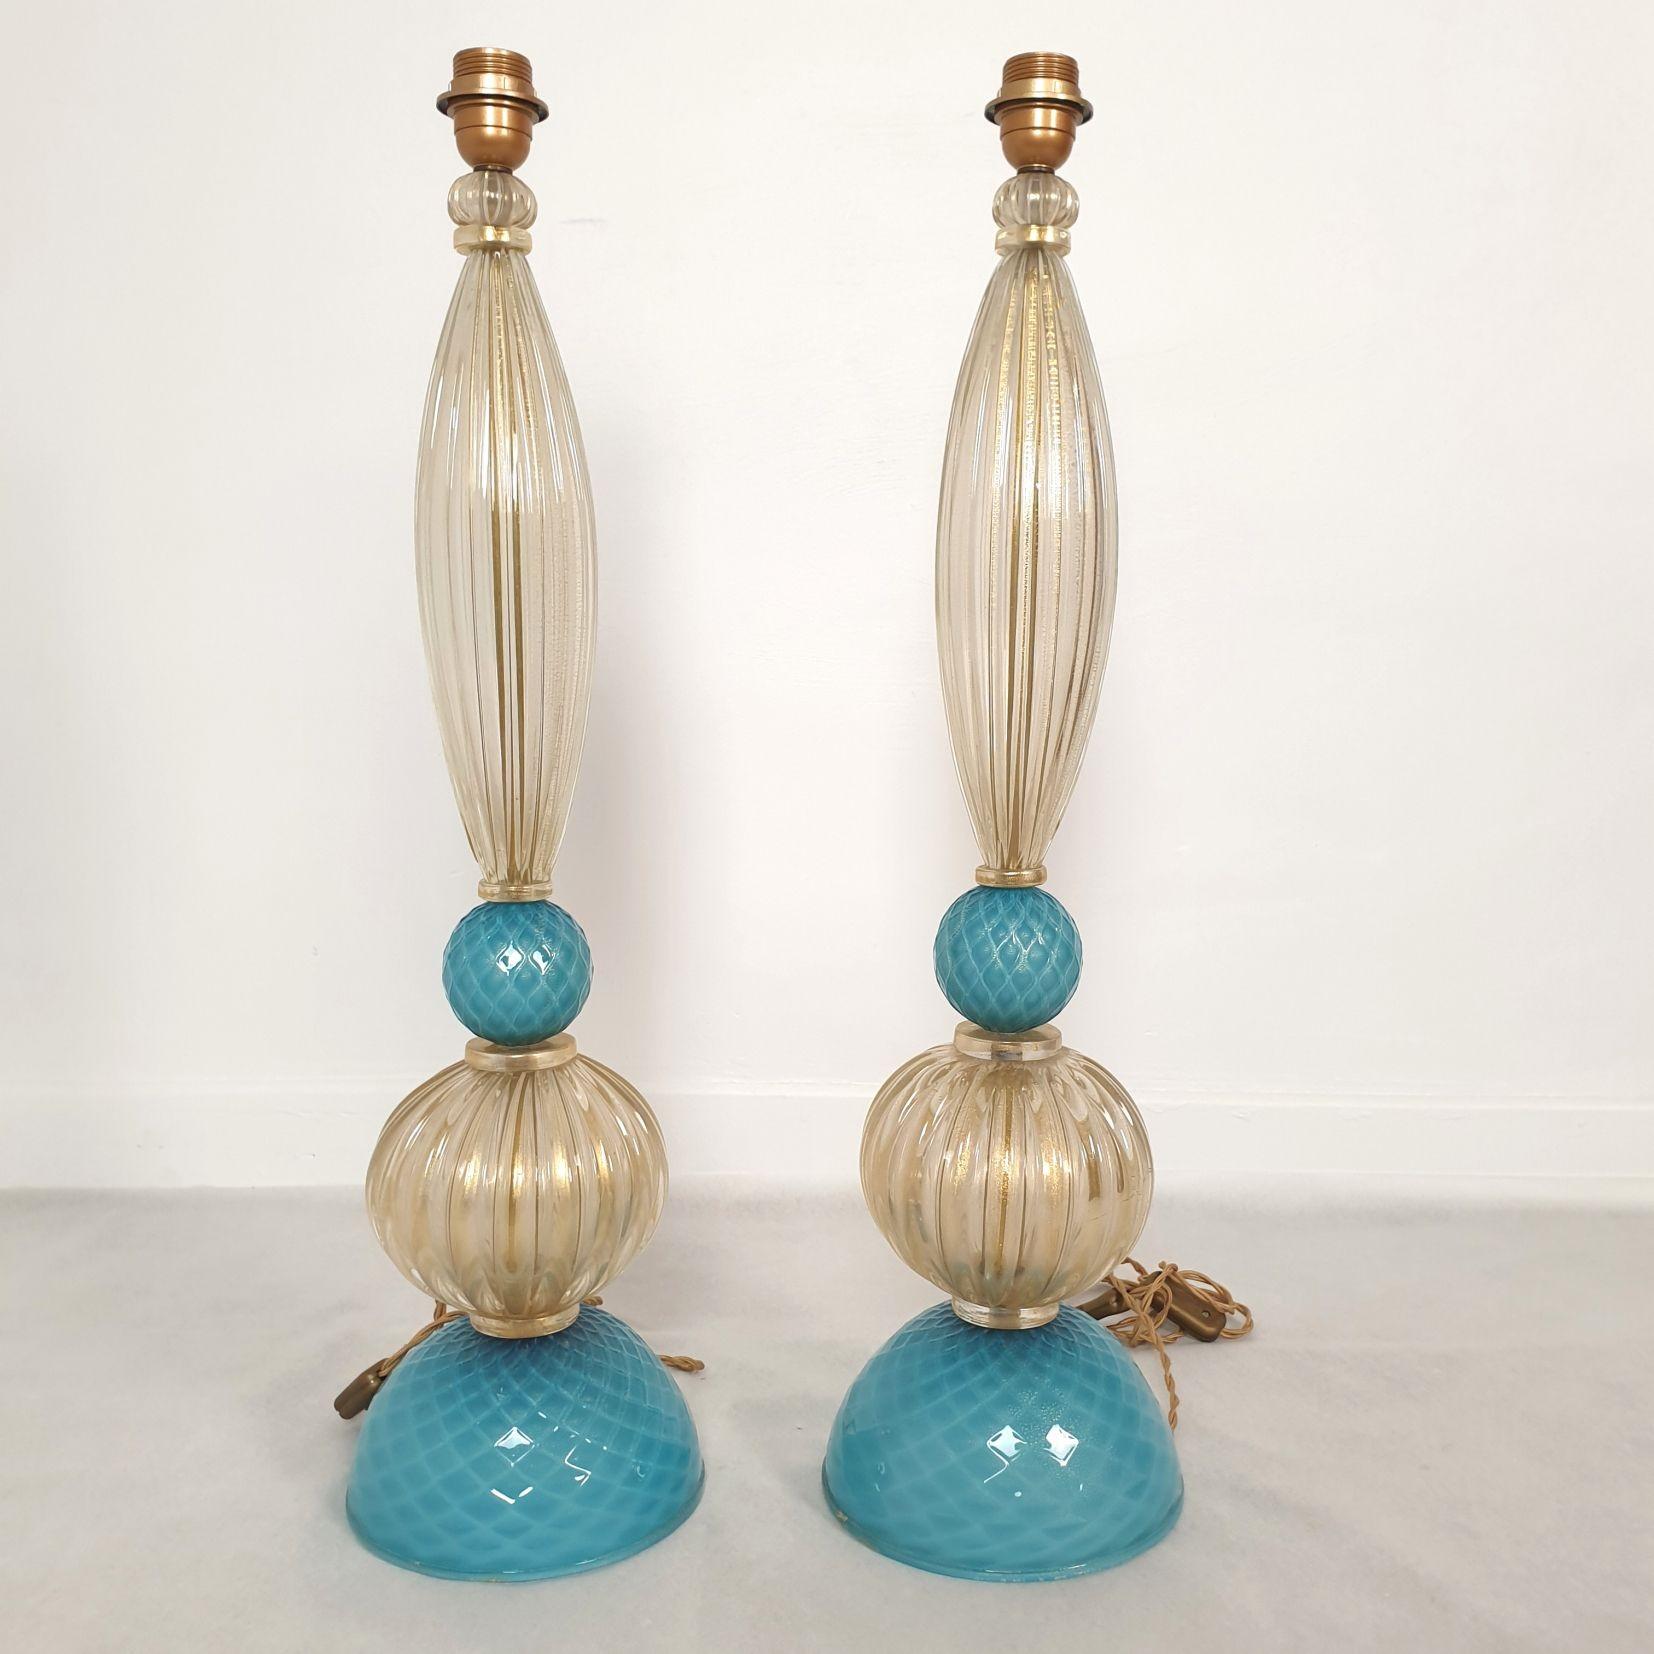 Midcentury large pair of Murano glass lamps, stamped Barovier, Italy 1970s.
The large lamps have a neoclassical style.
They are made of hand blown sky blue and clear with real gold flakes Murano glass elements.
The Murano lamps are stamped: